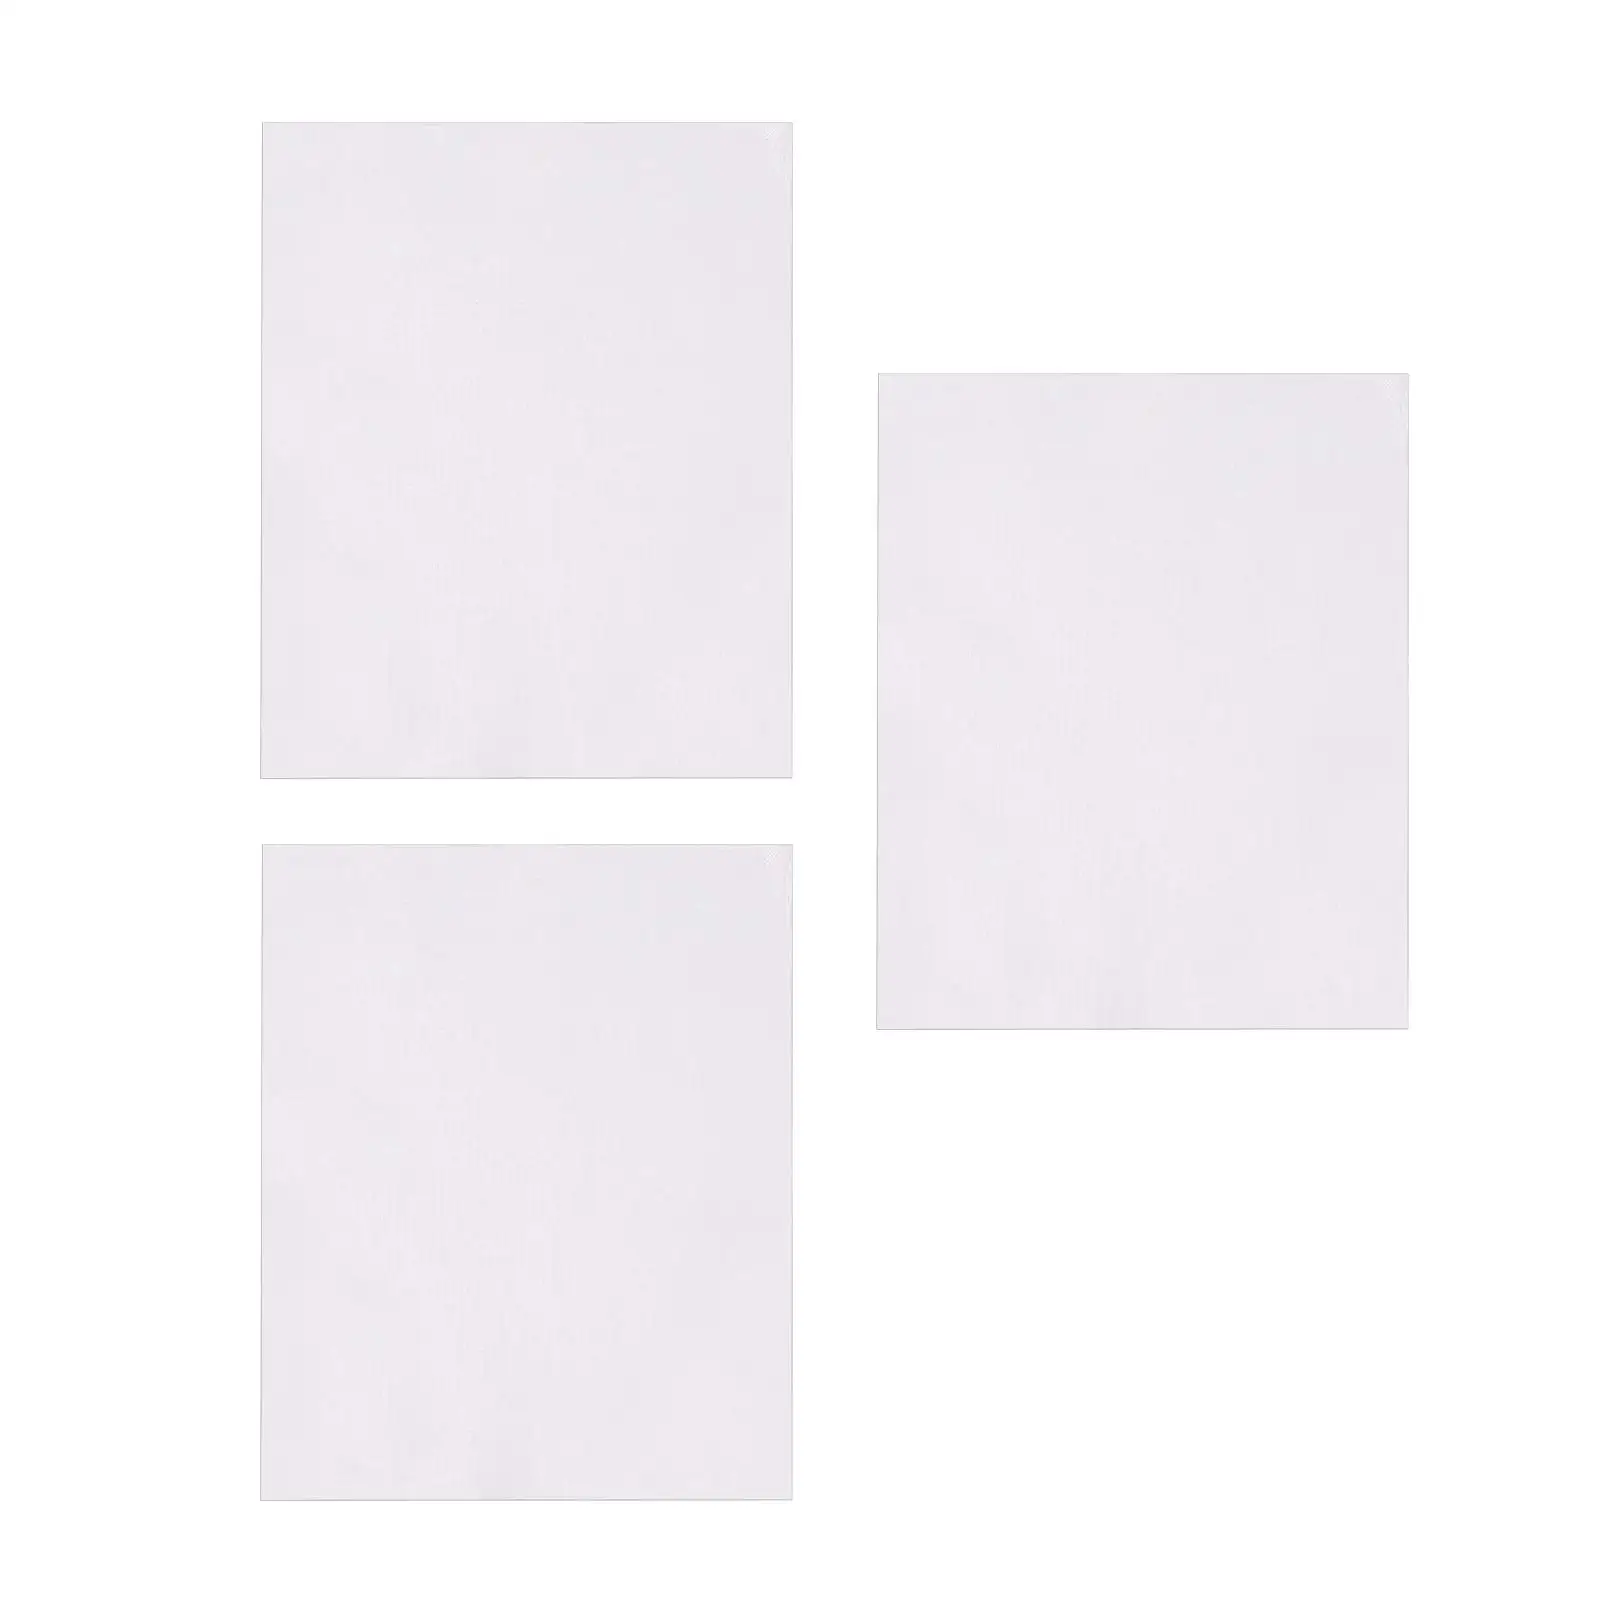 3Pcs Canvas Panels Acrylic Oil Painting Artwork Home Wall Decor Cotton Artist Blank Canvas Boards for Beginners Acrylic Painting